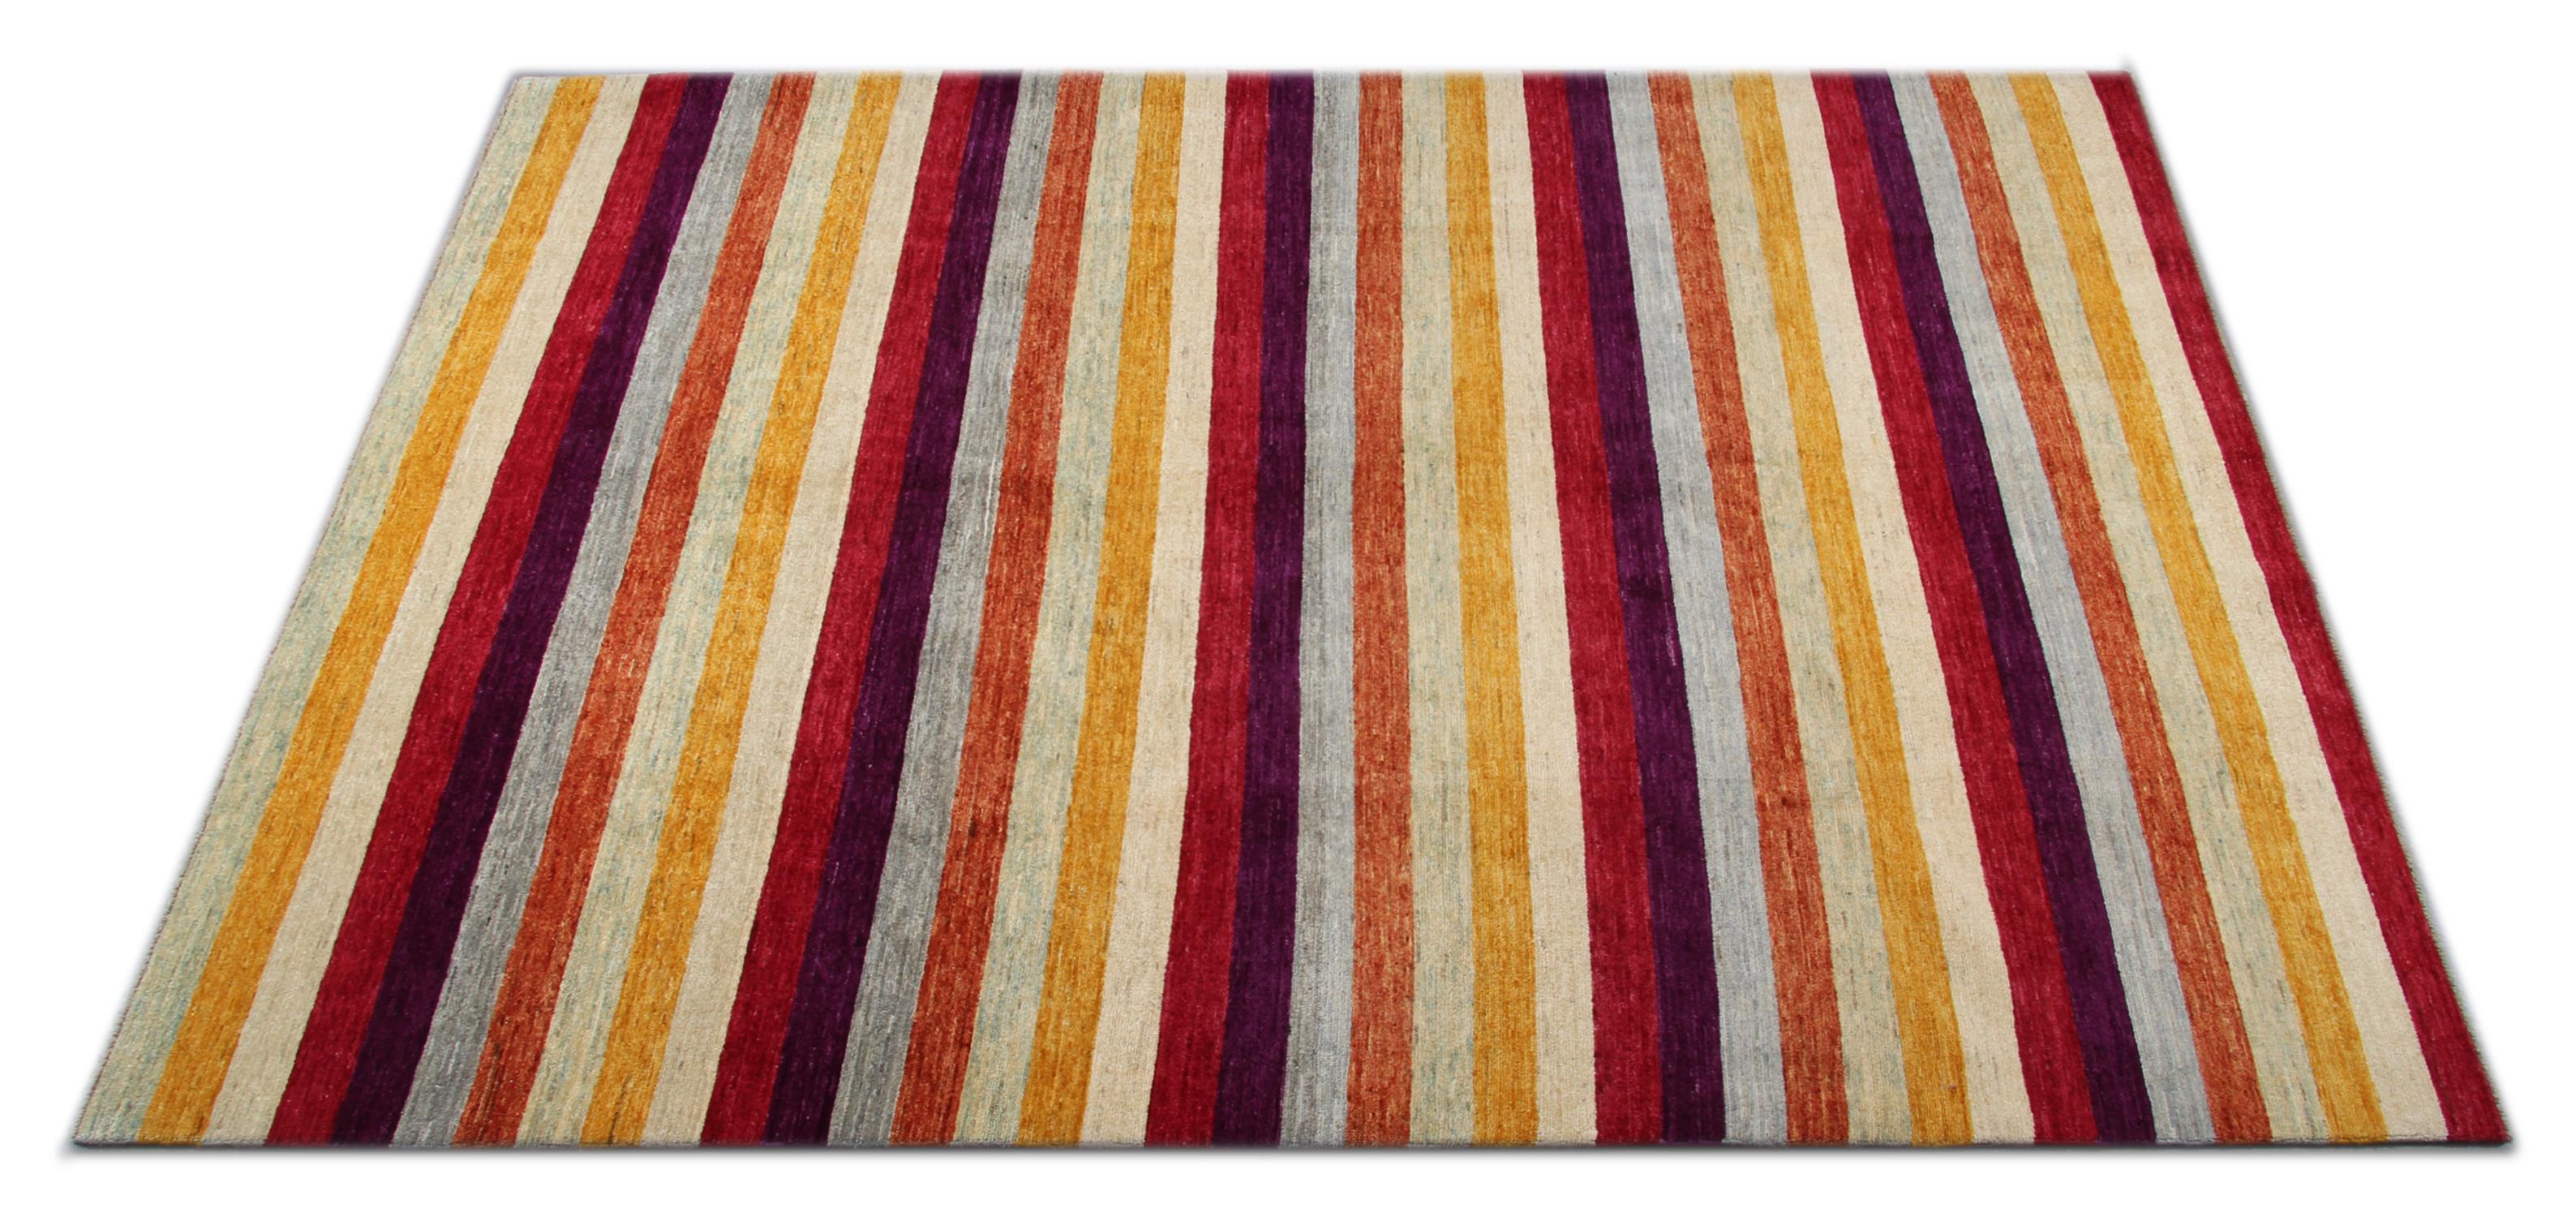 This modern area rug was hand knotted in India, the rug is a low pile carpet. Constructed with handspun wool featuring multicolored stripes of orange, yellow, grey and green. The contemporary design is perfect for both modern and traditional